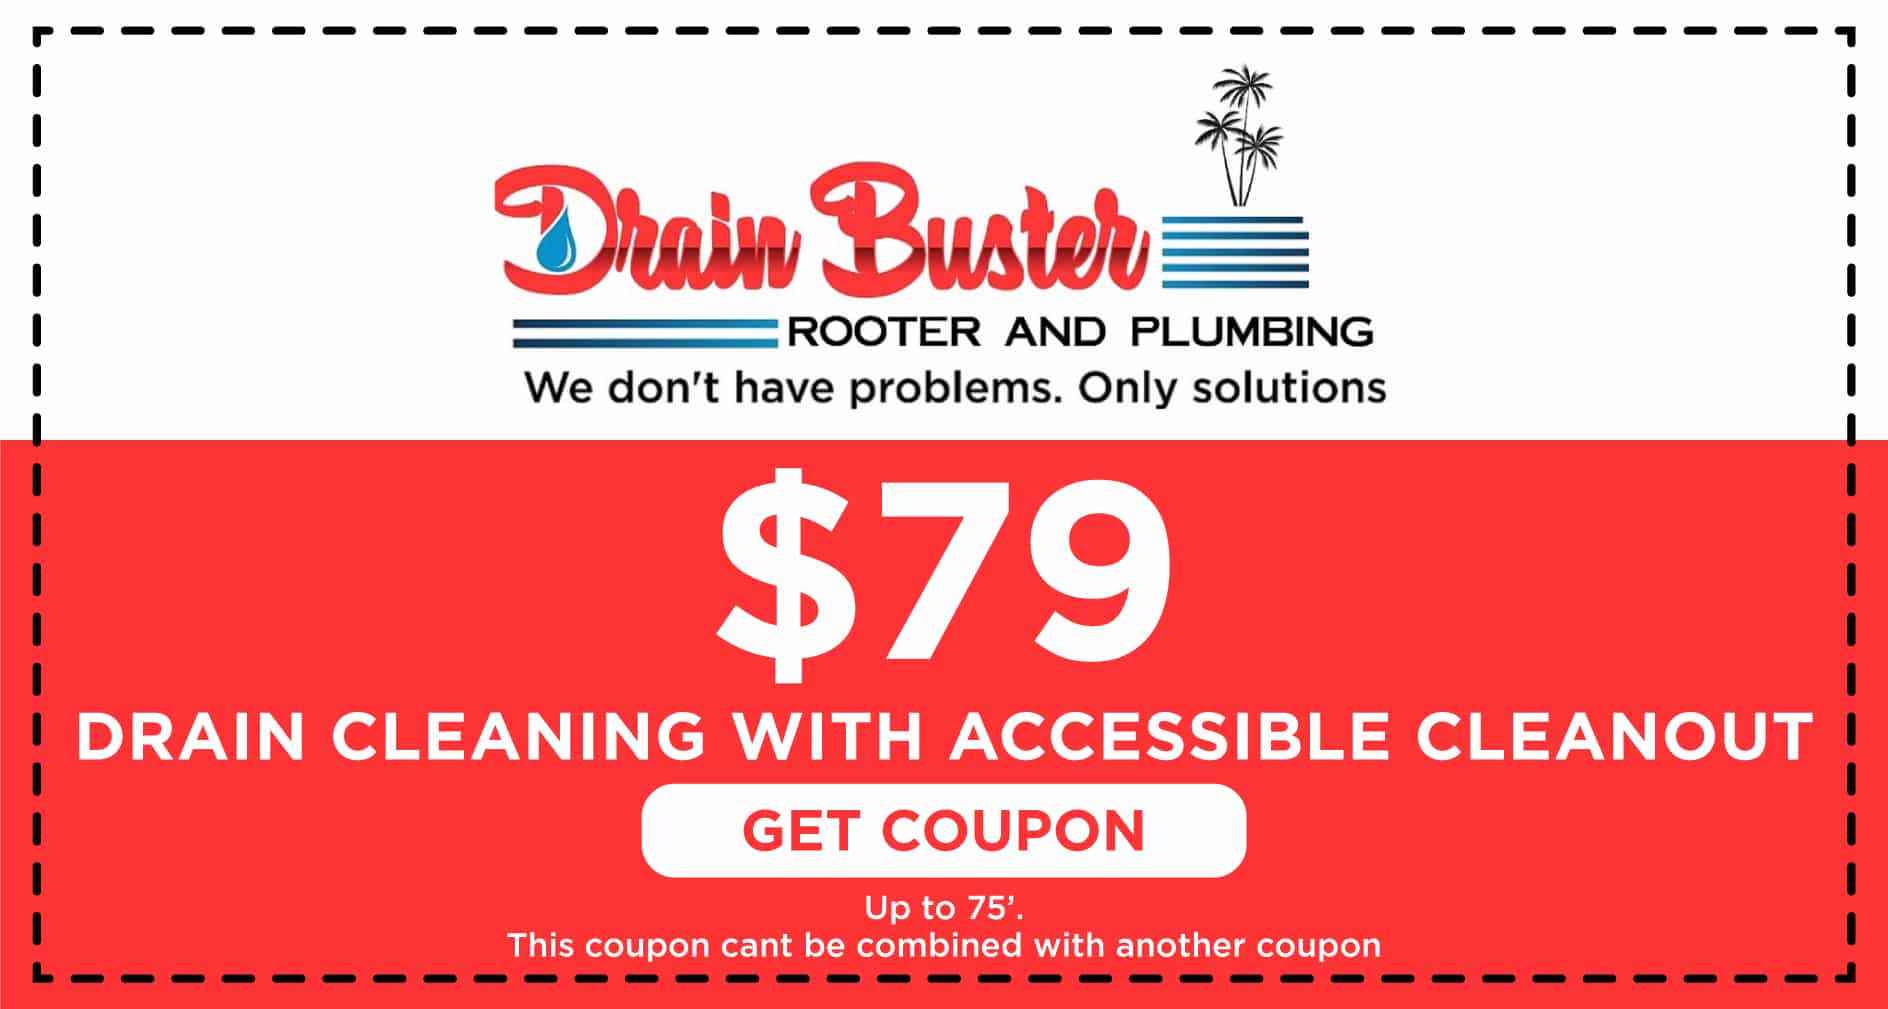 Drain Buster Drain Cleaning Coupon